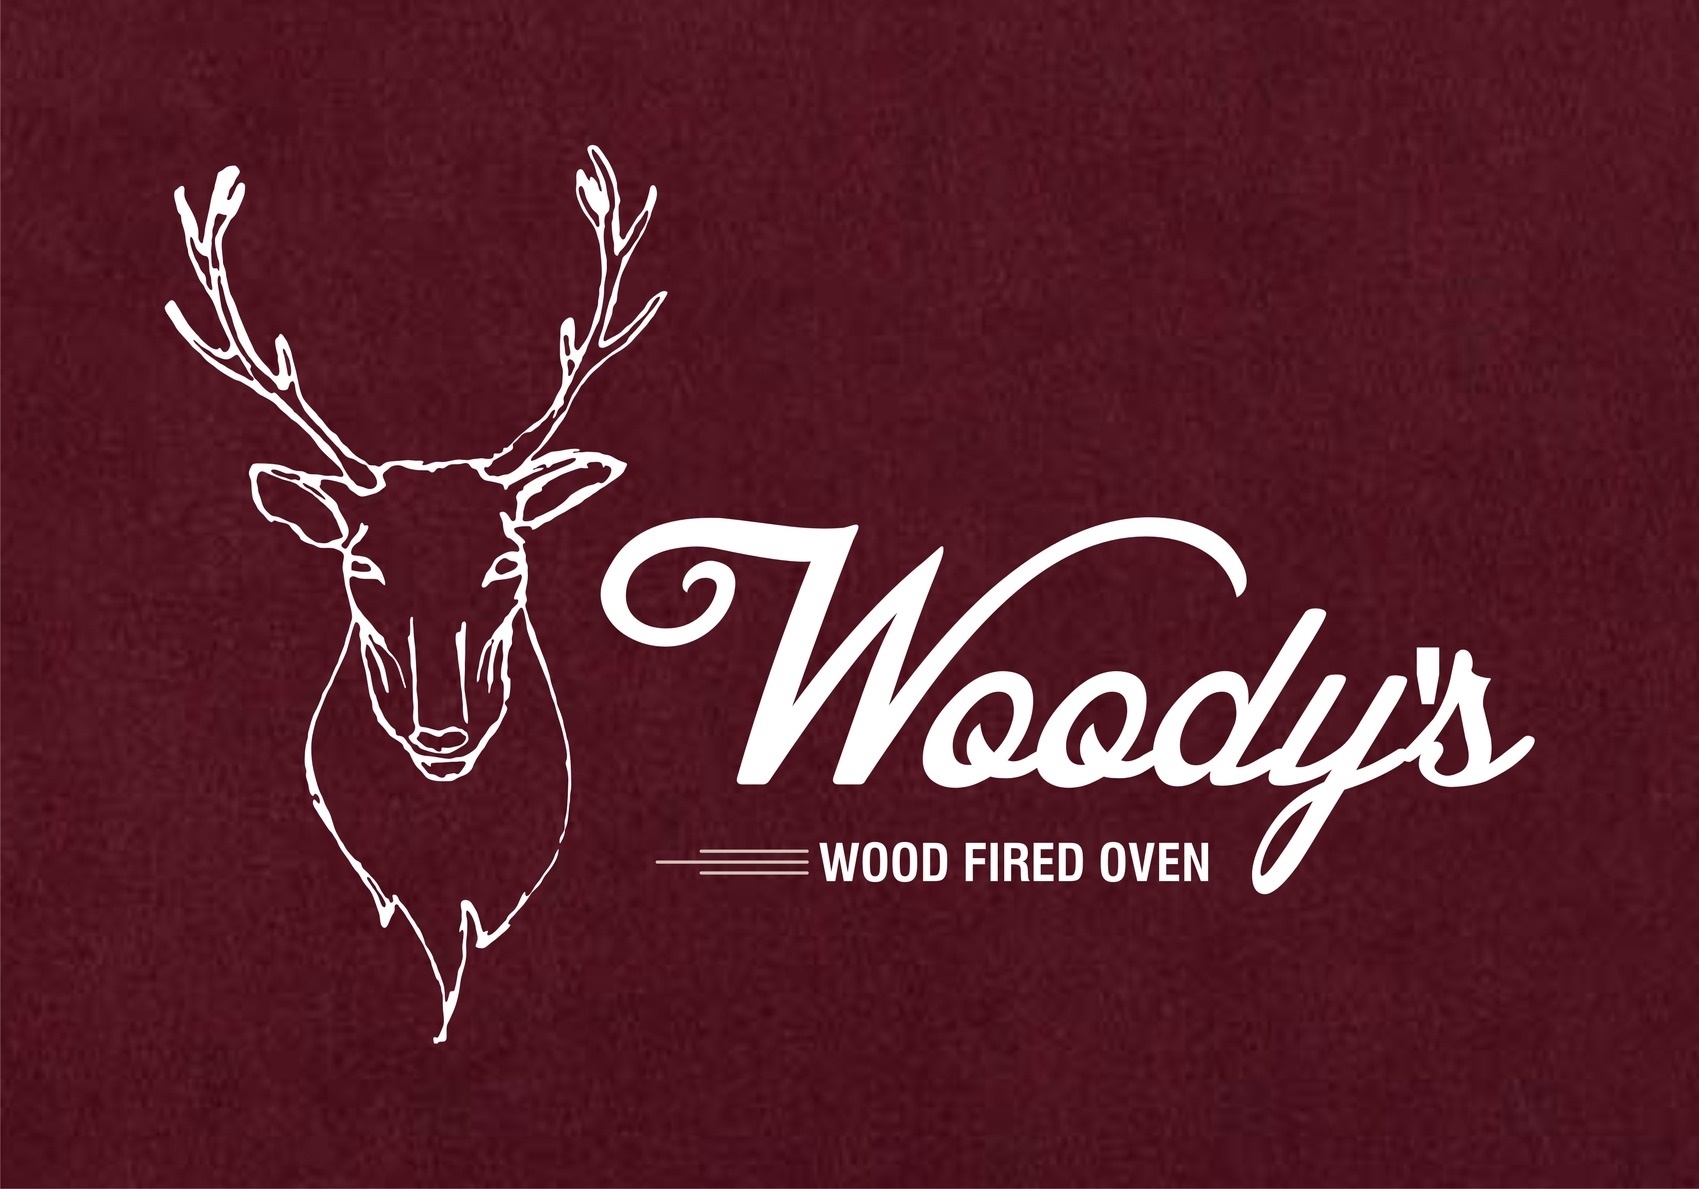 Woodys-Wood-Fired-Oven